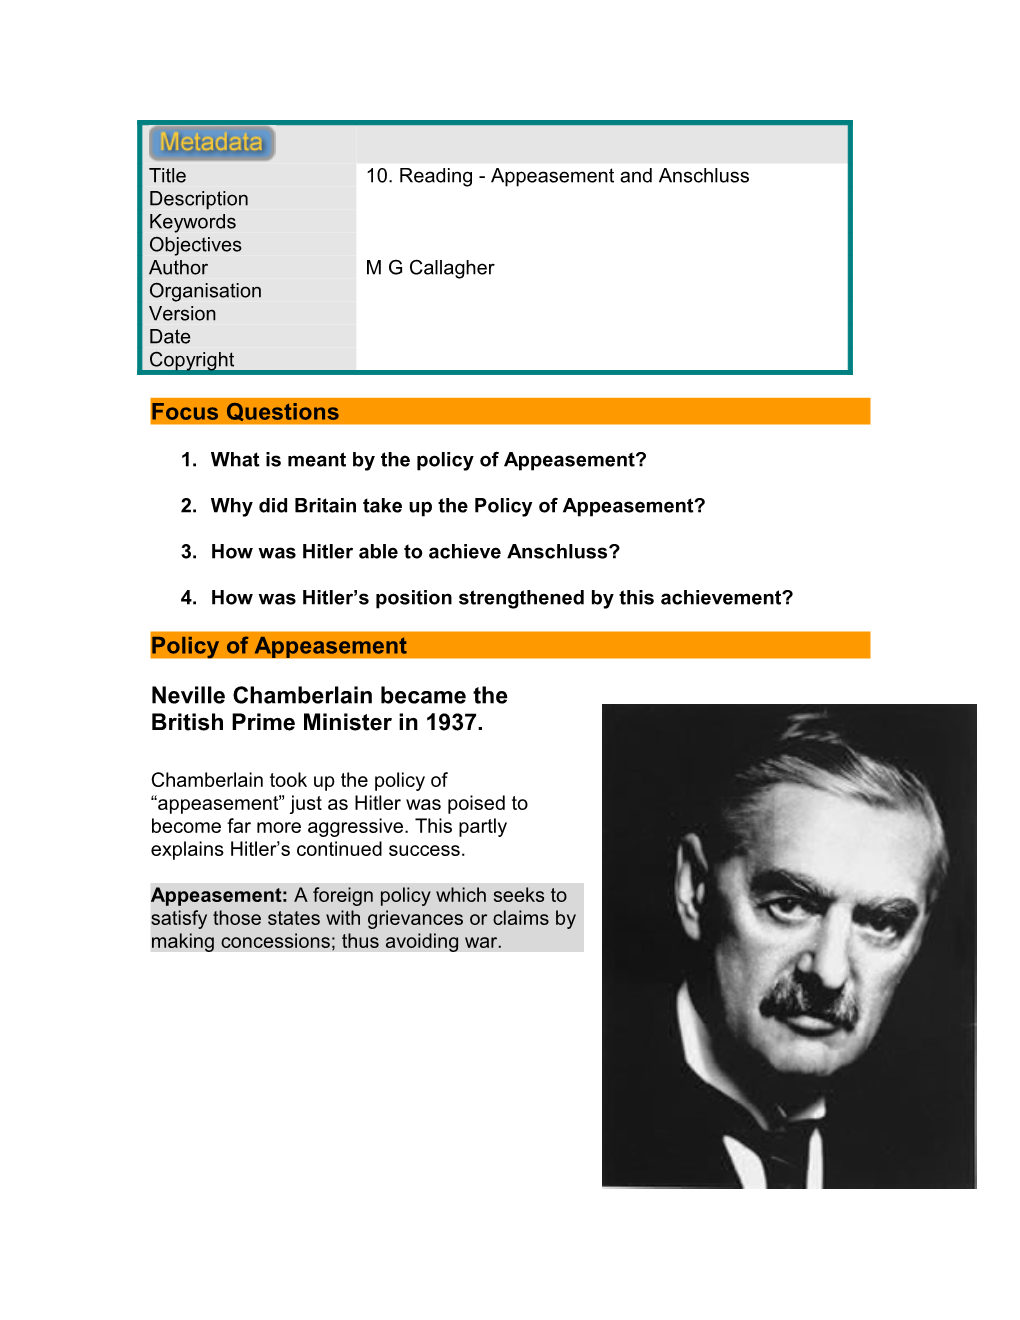 10. Reading - Appeasement and Anschluss